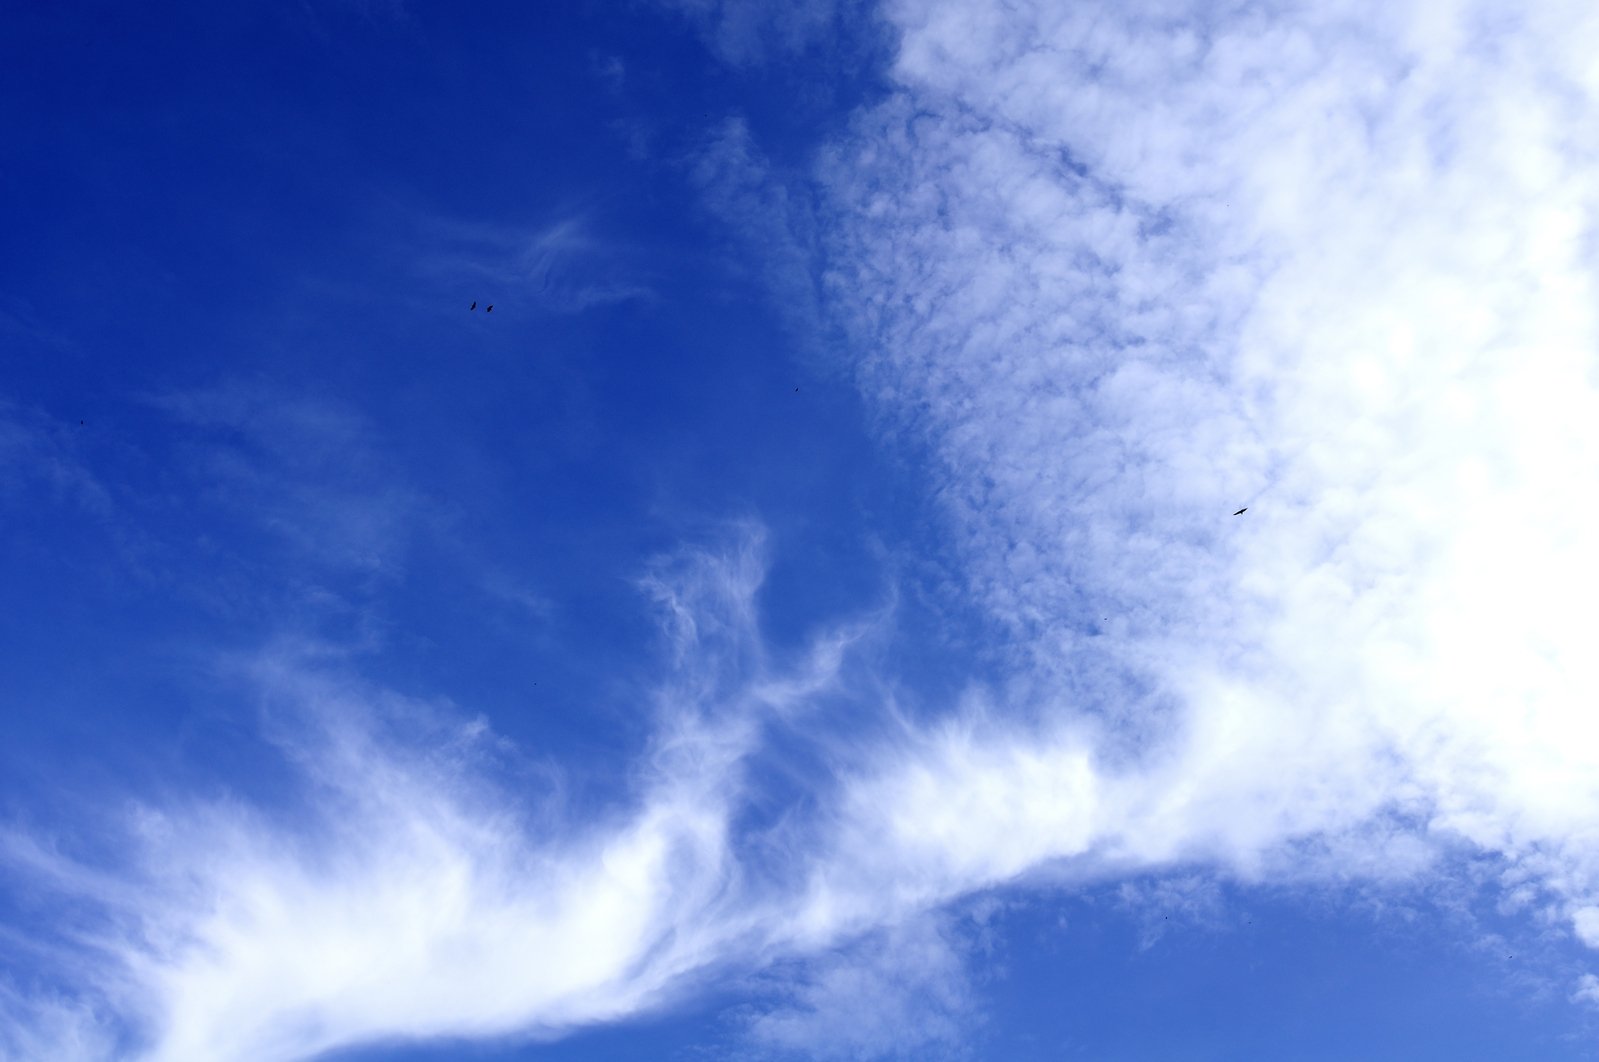 a view of a blue sky with some clouds in the background